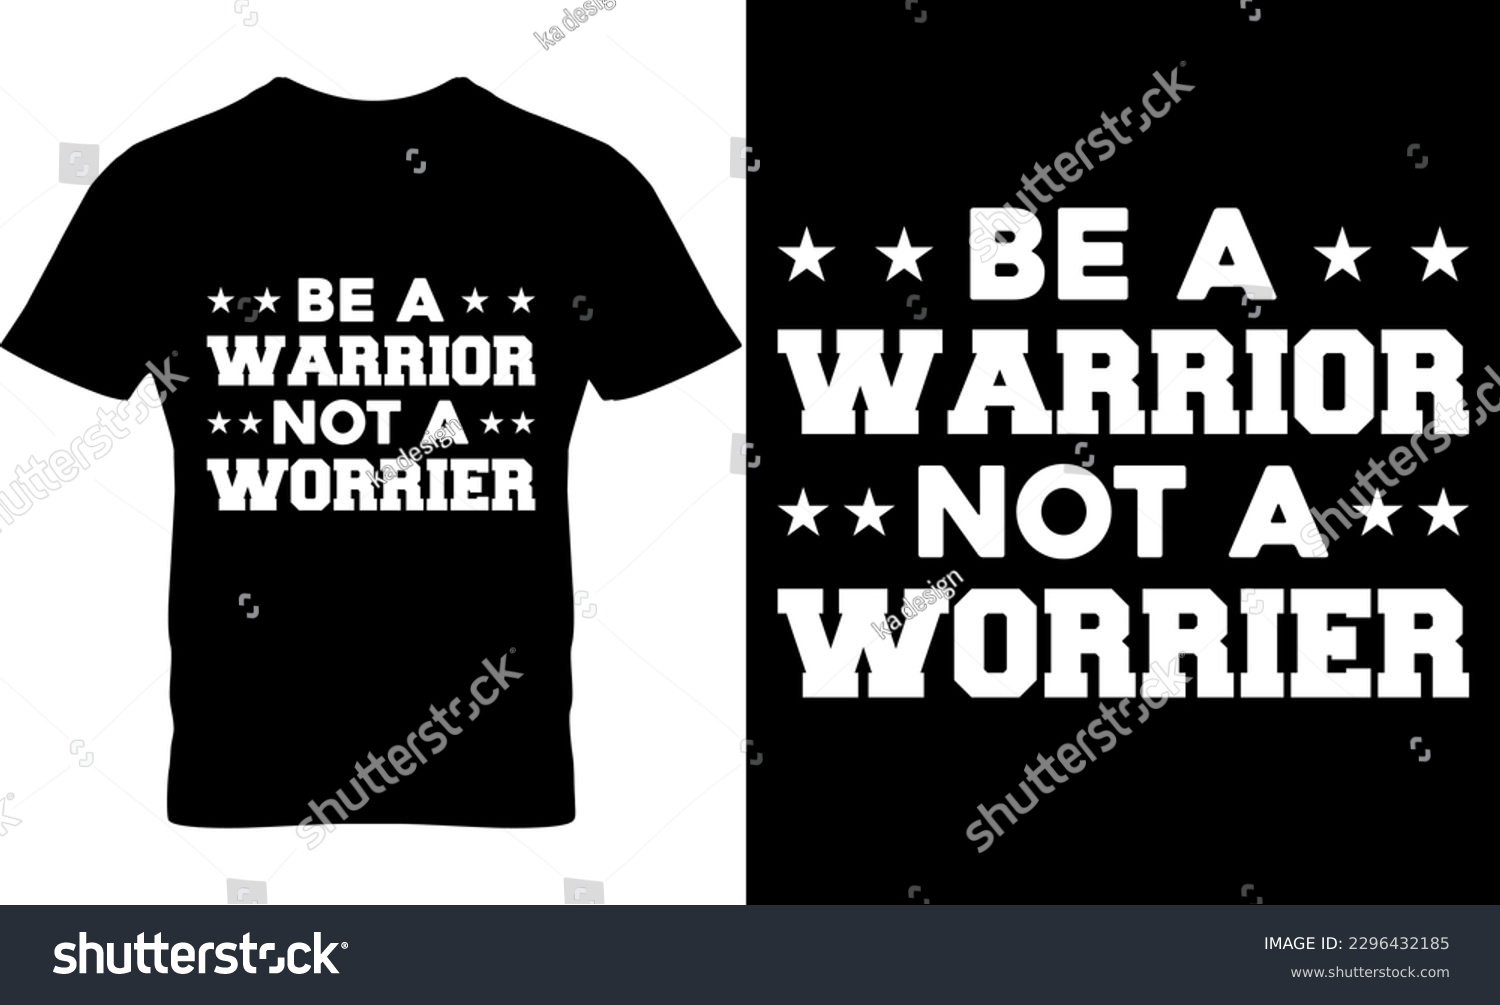 SVG of be a warrior not a worrier, Graphic, illustration, vector, typography, motivational,  inspiration t-shirt design, Typography t-shirt design, motivational quotes, motivational t-shirt design, svg